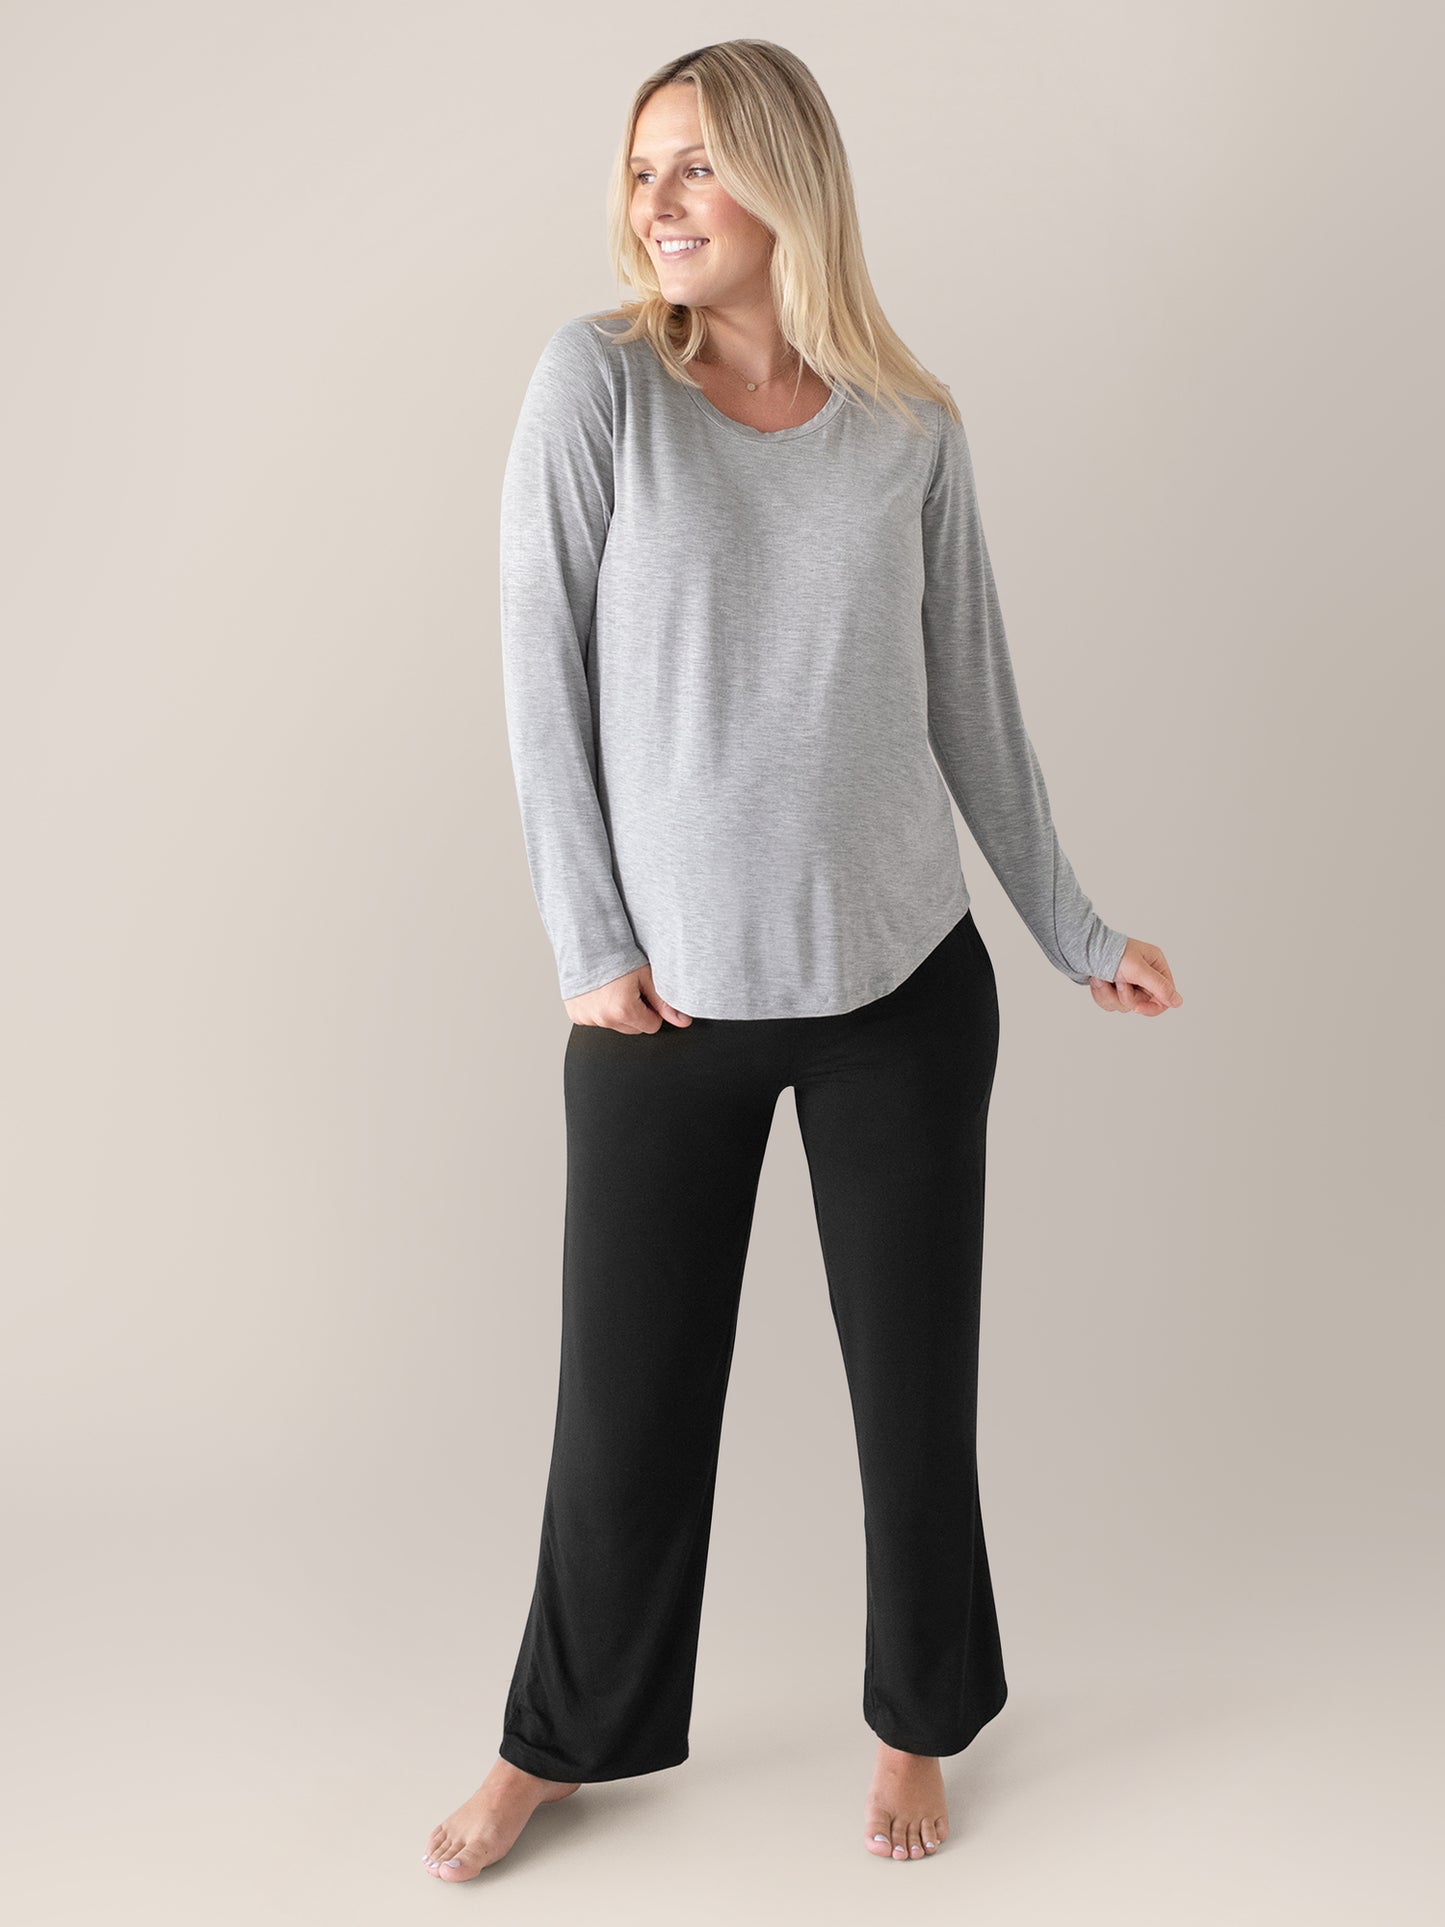 Model wearing the  Bamboo Maternity & Nursing Long Sleeve T-shirt in Grey Heather with her hand on the hem.